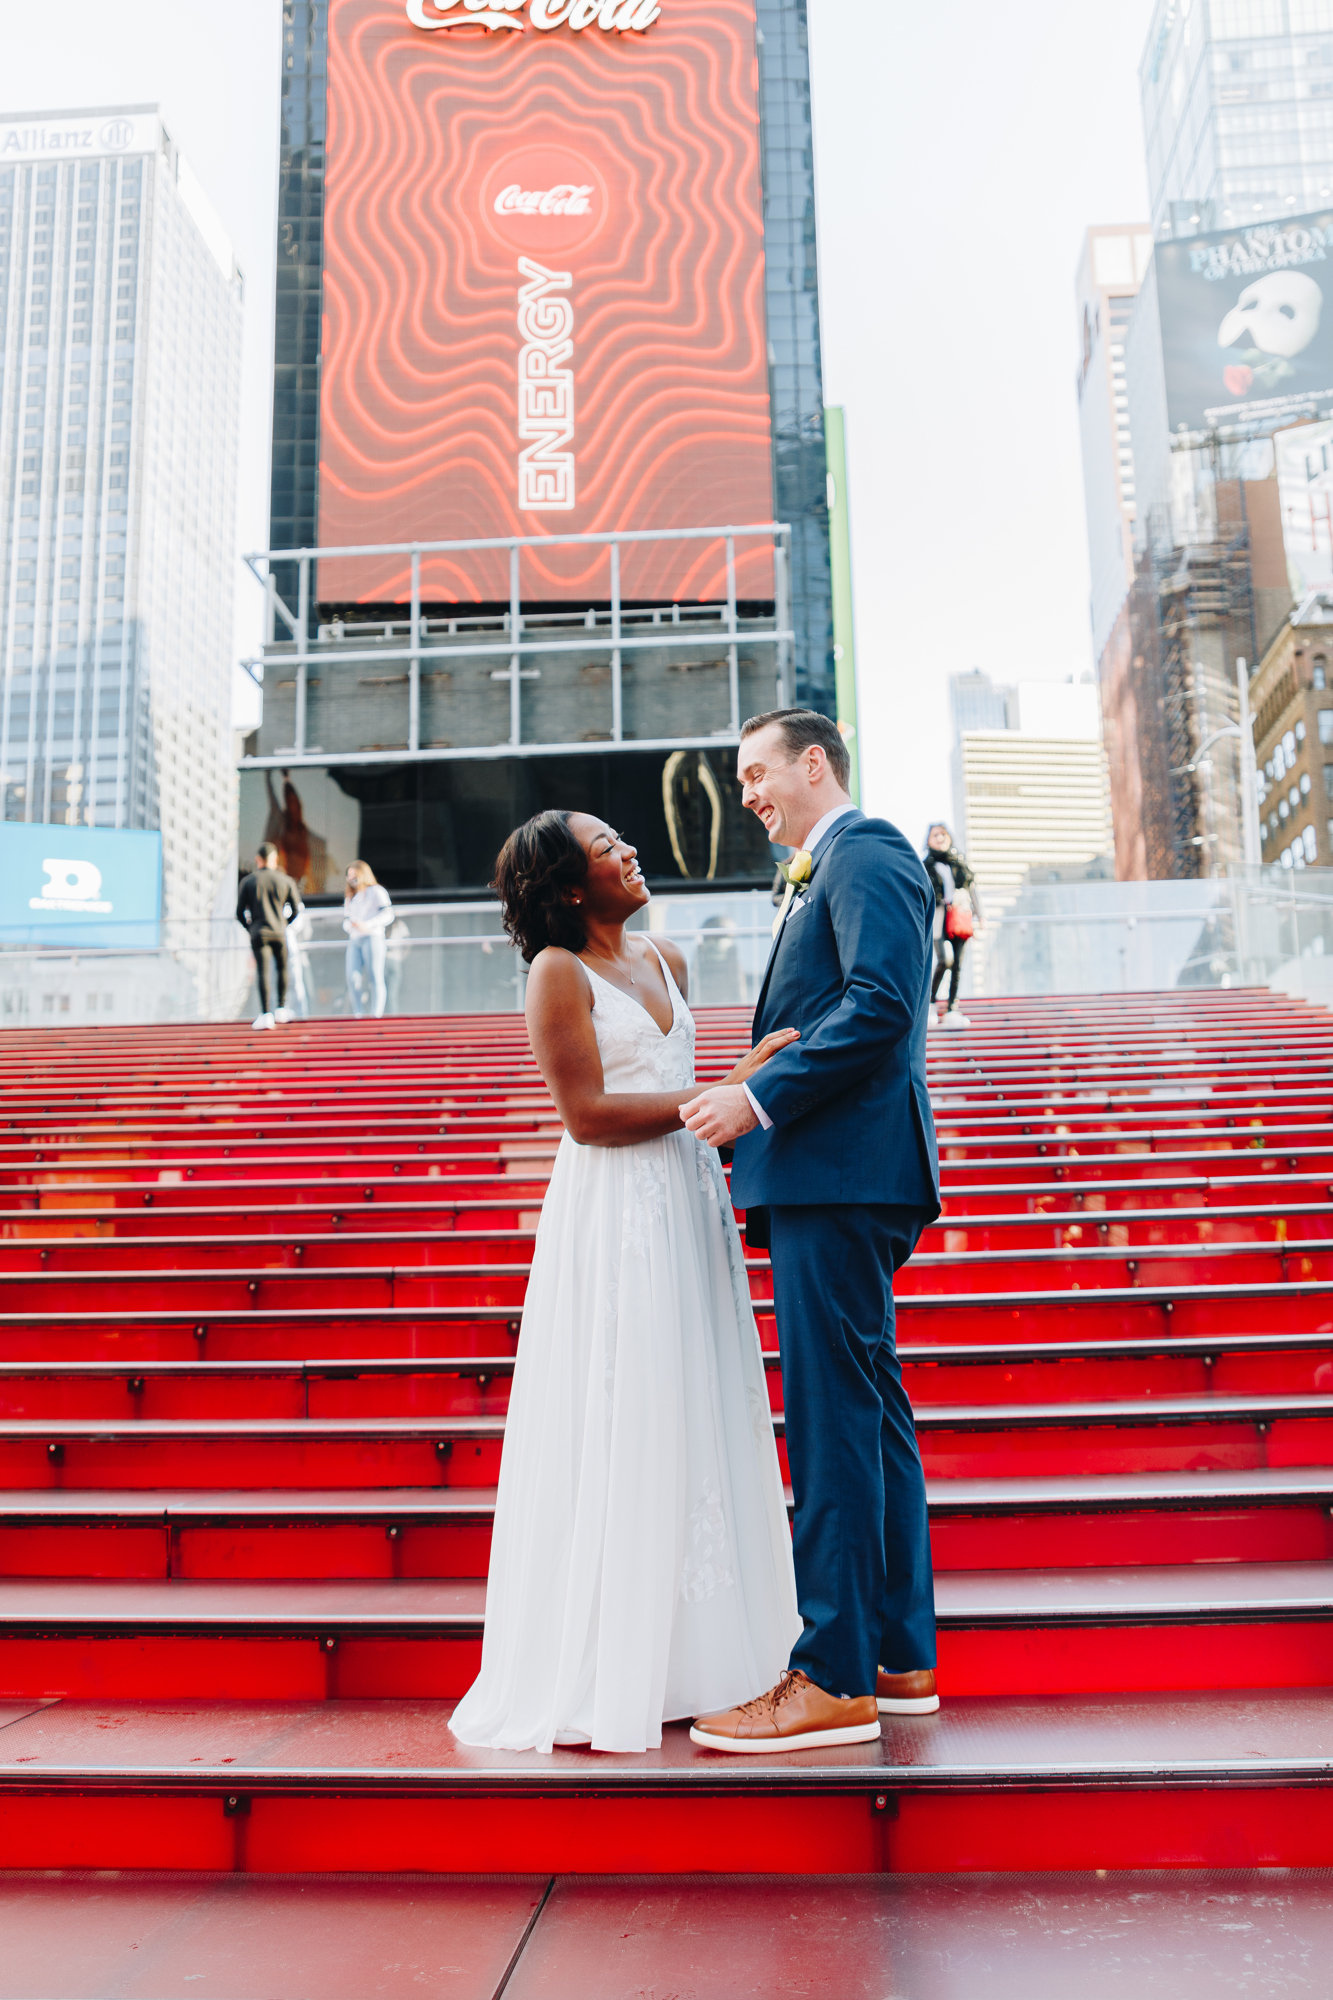 Morning Times Square Wedding Photos in New York